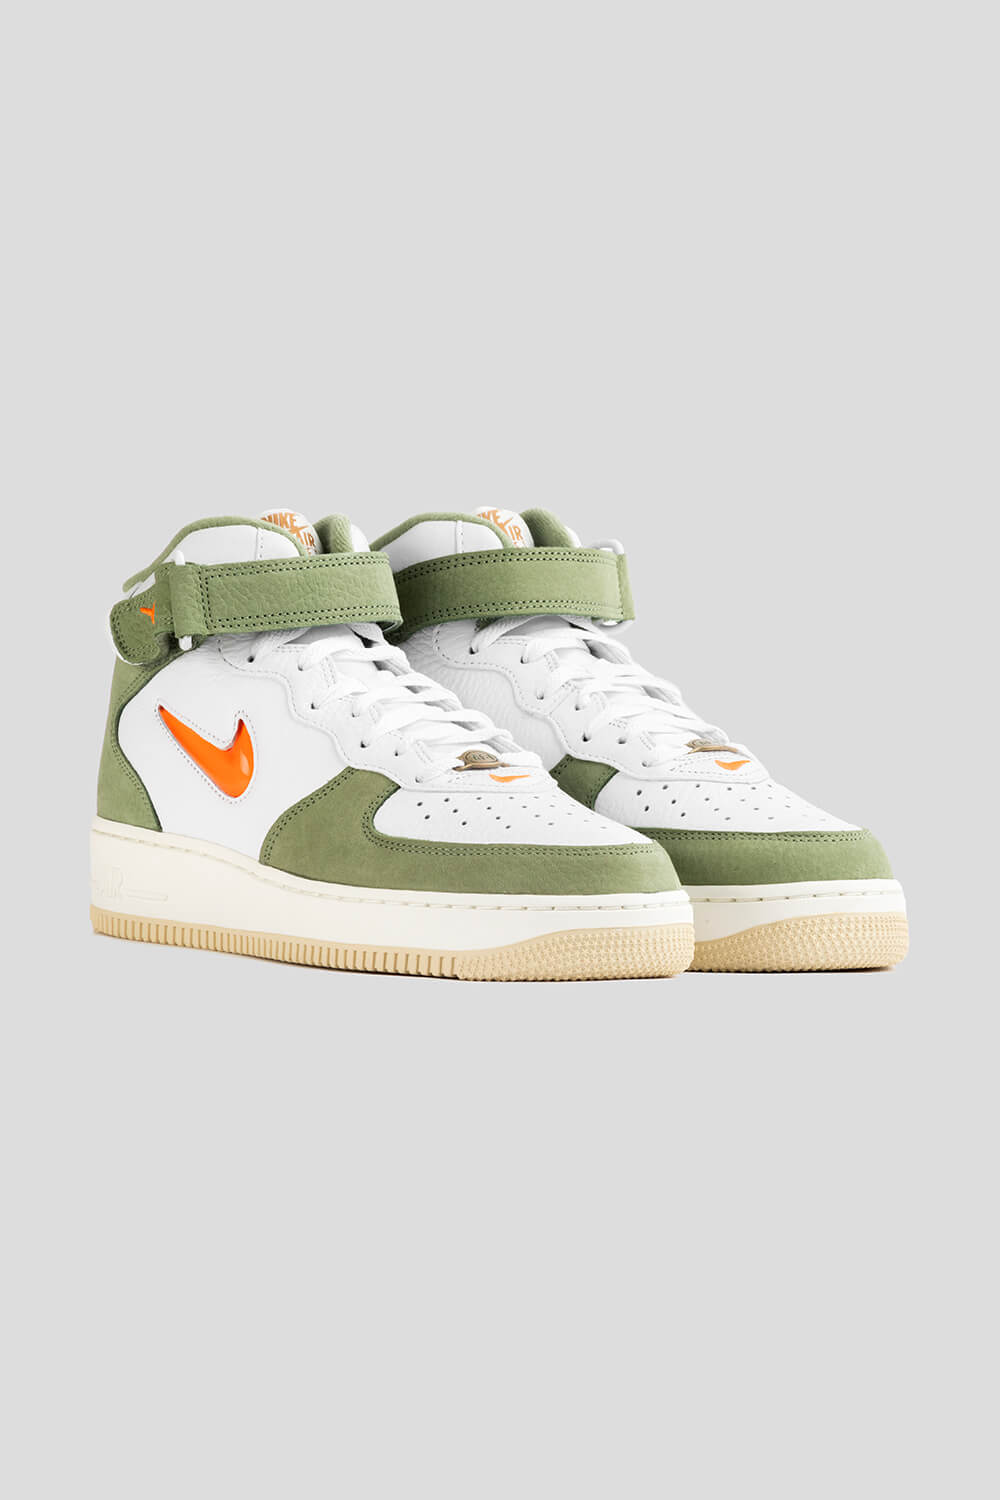 Nike Air Force 1 Mid Olive Green Total Orange Shoes 